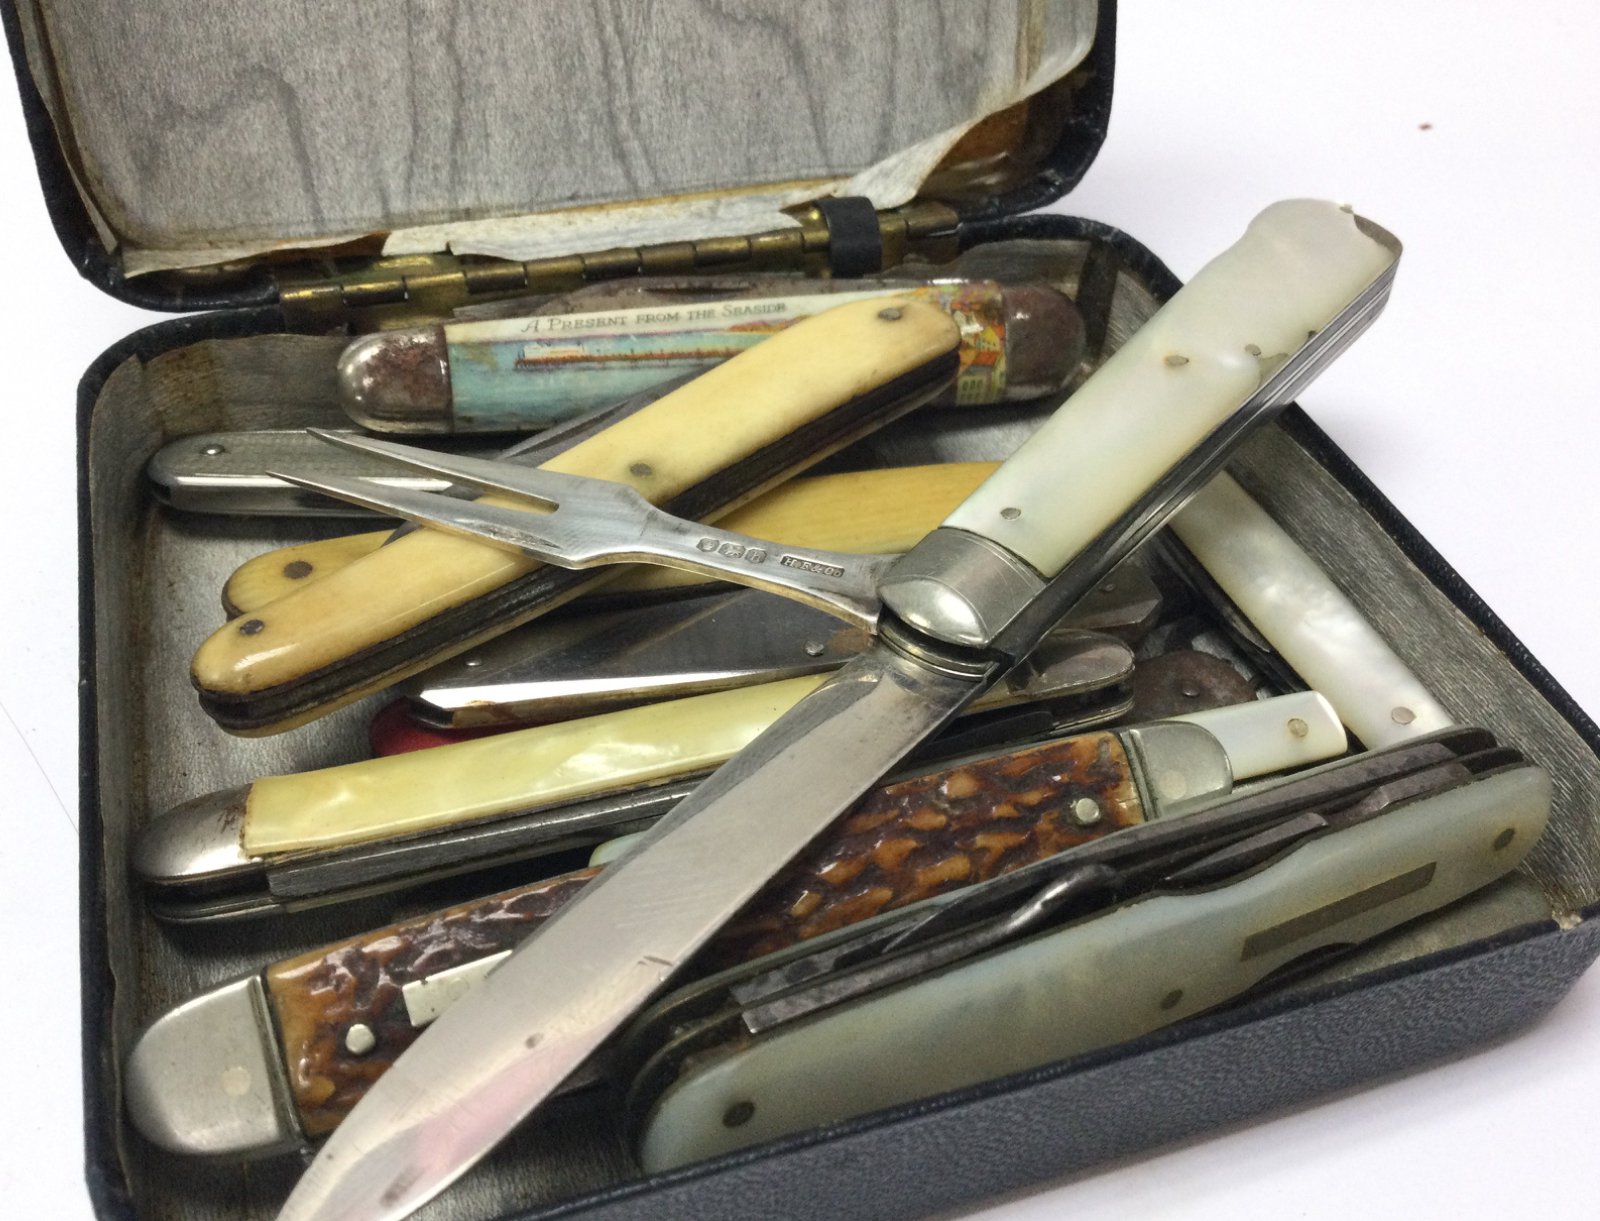 A collection of vintage penknives including a silv